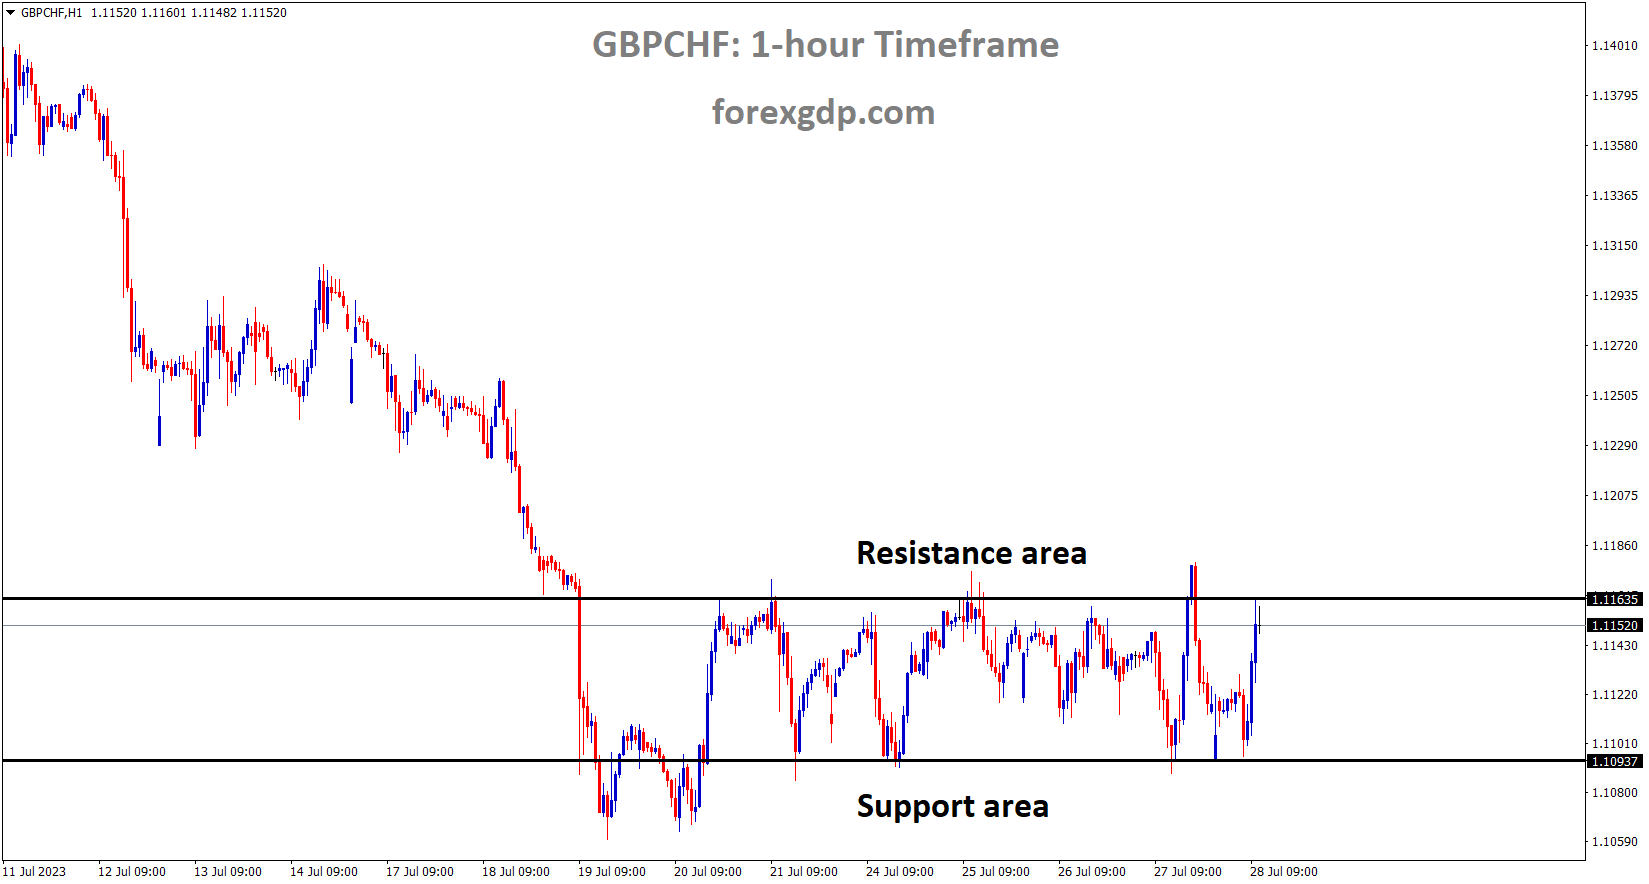 GBPCHF is moving in the Box pattern and the market has reached the resistance area of the pattern